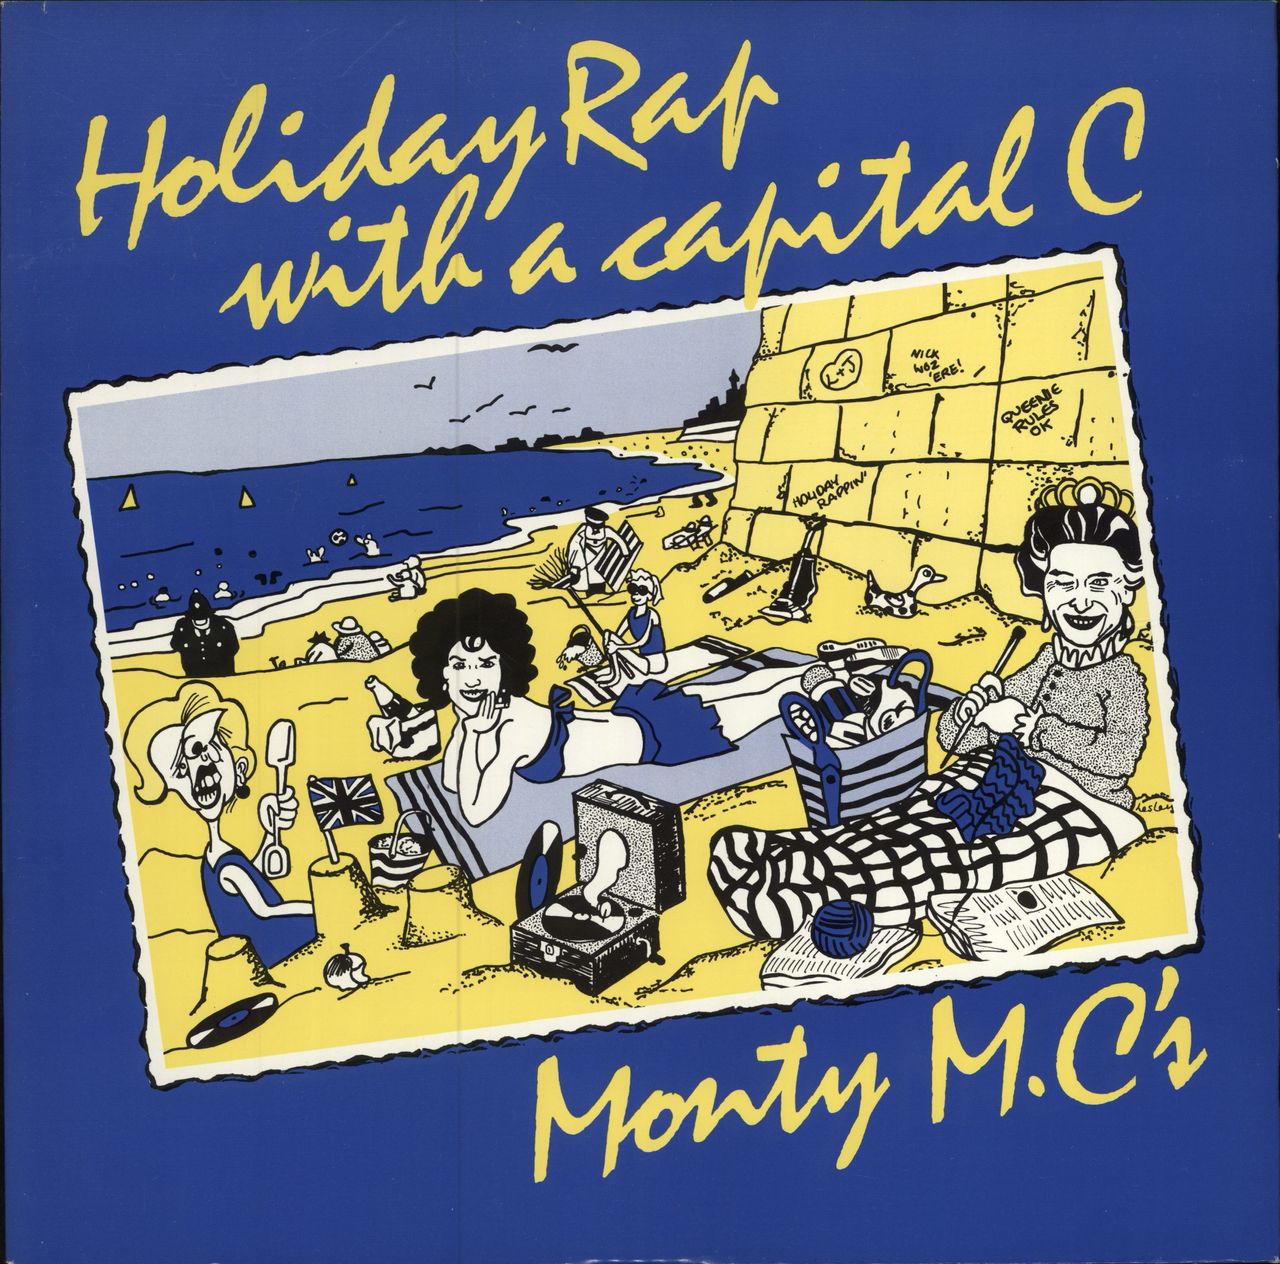 Monty M.C.'s Holiday Rap With A Capital C - Picture Sleeve UK 12" vinyl single (12 inch record / Maxi-single) DEBTX3011